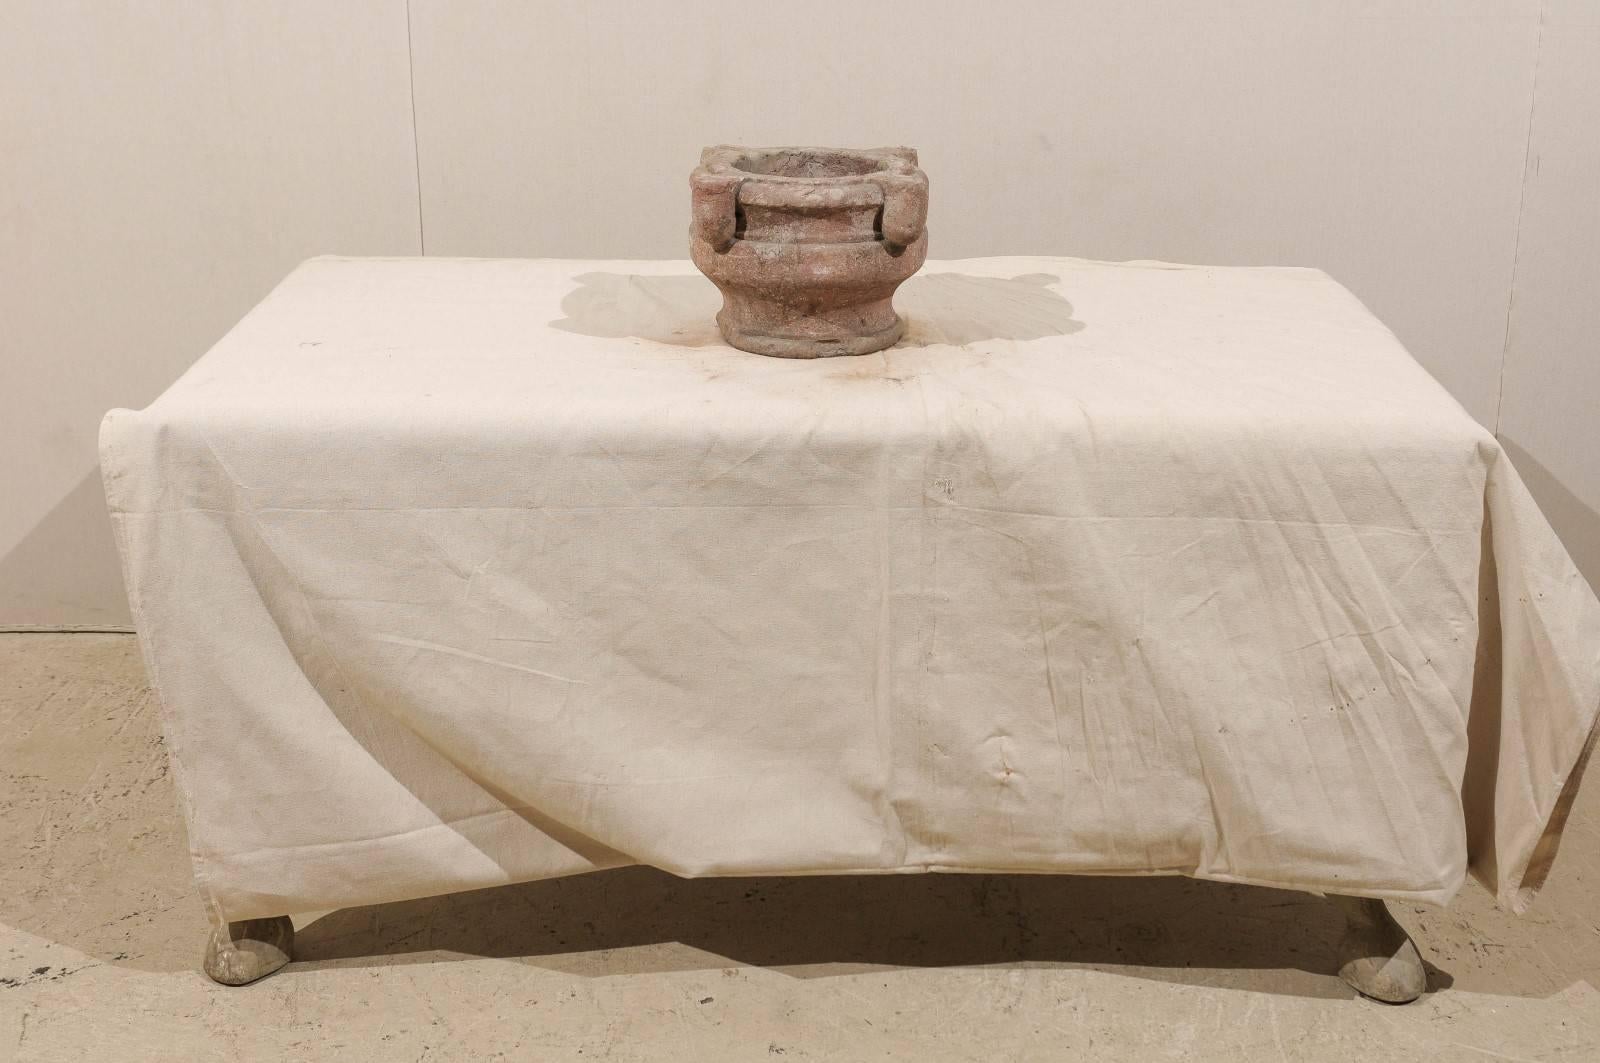 An Italian 18th century mortar. This antique mortar is adorned with four, three-dimensional decorations along the rim. The mortar is larger at the top, and swoops inward towards the base creating a curving look. The general tones are red with grey